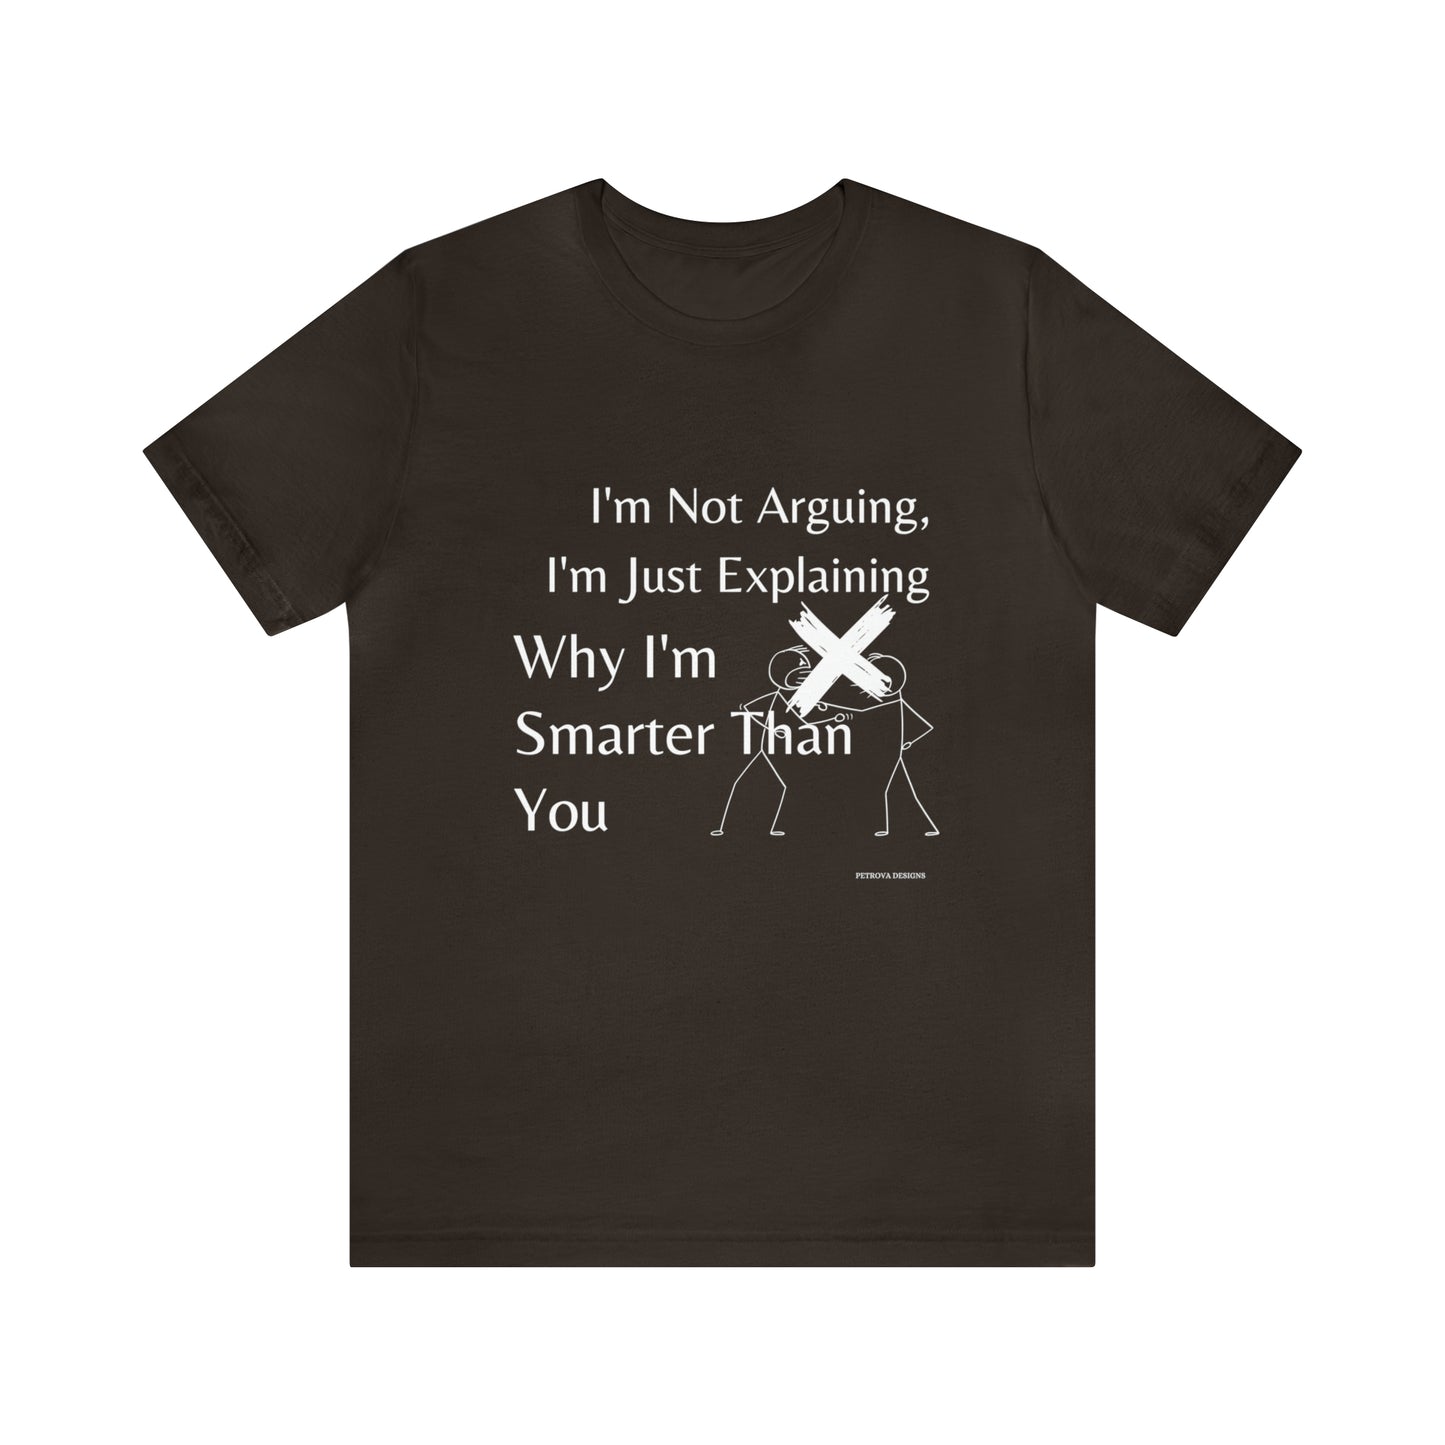 Funny and Humorous T-Shirt Brown T-Shirt Petrova Designs